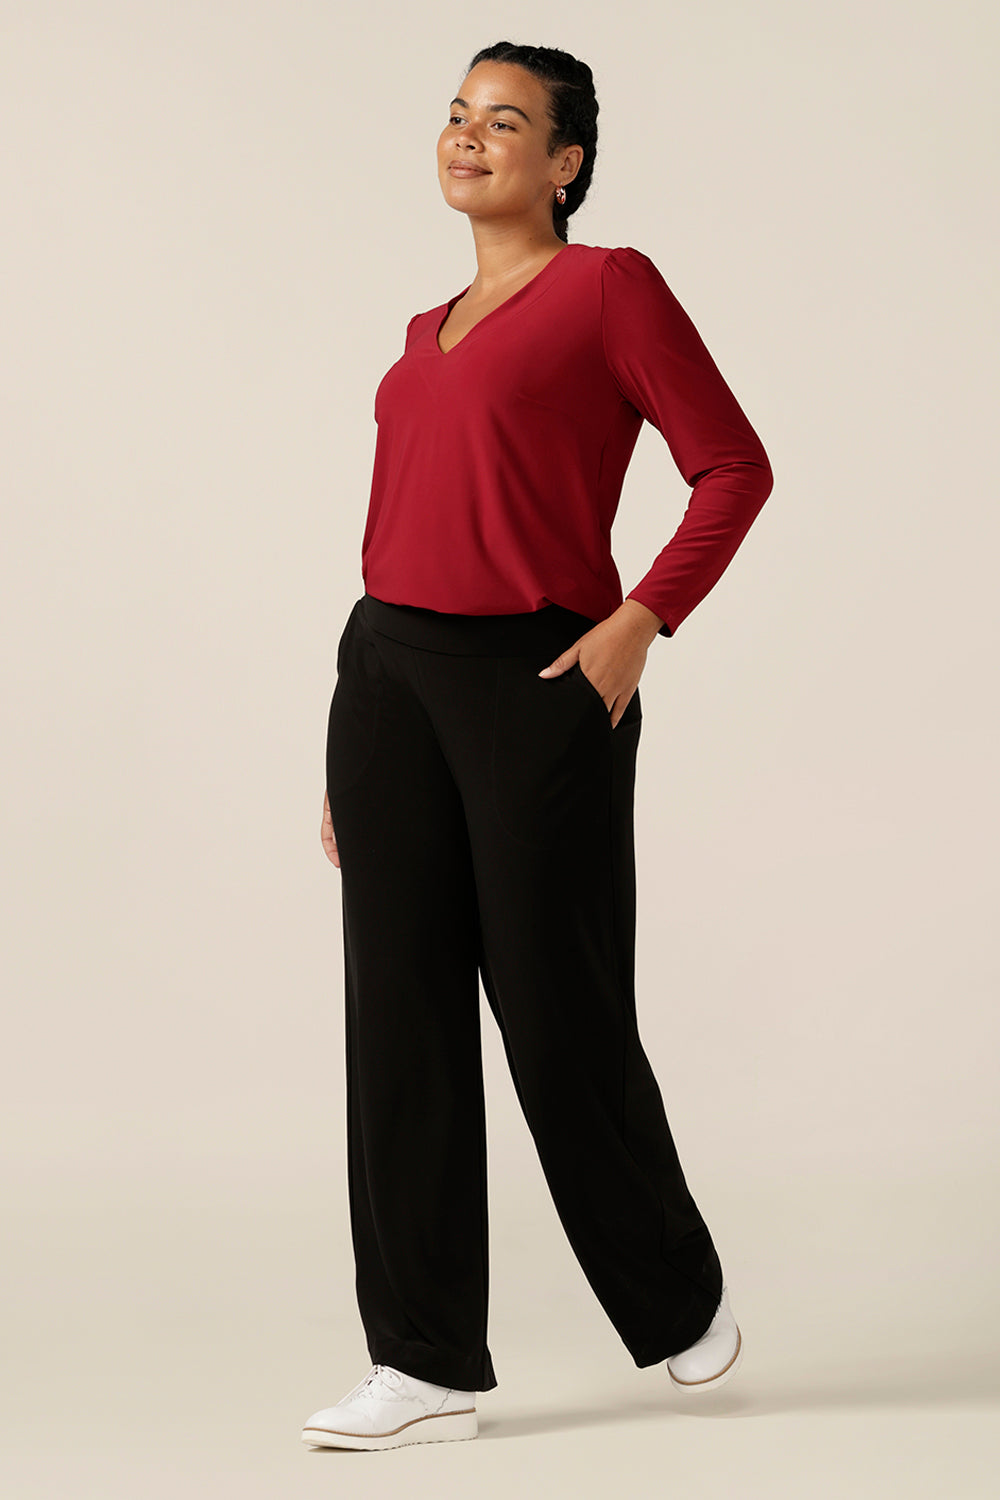 A size 12, curvy woman wears a V neck jersey top in flame red jersey. With long sleeves, this top is a good autumn/winter top, and is styled here with wide leg black pants for a casual look. 